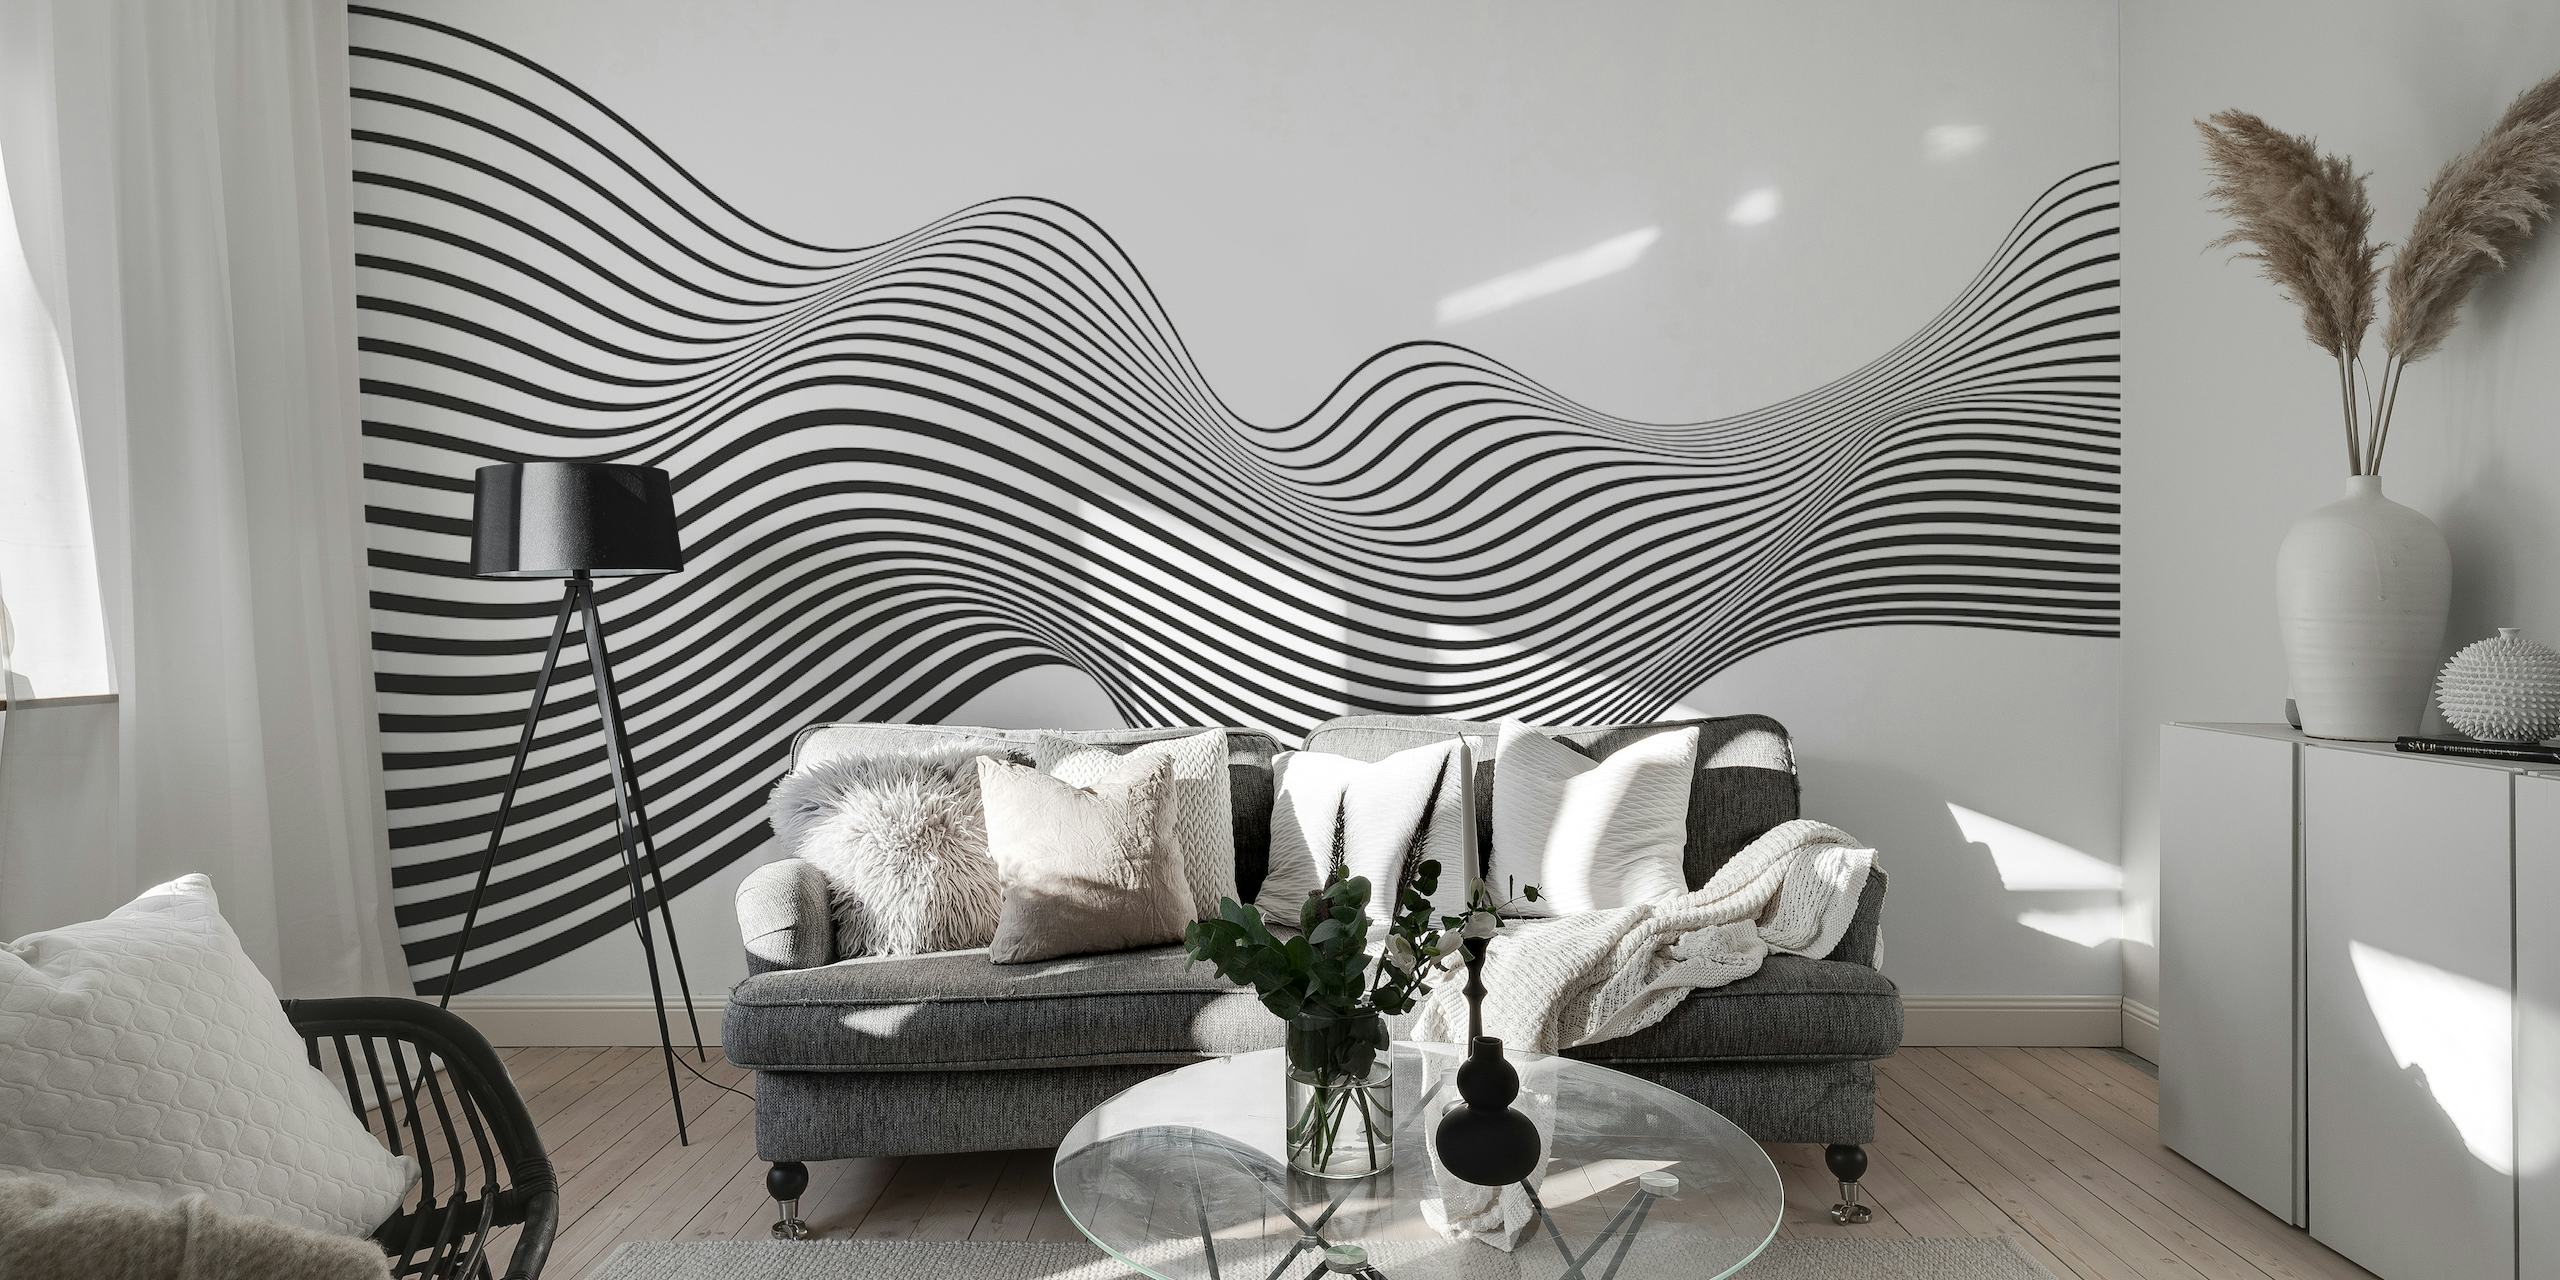 Elegant black and white wave pattern wall mural for a modern interior